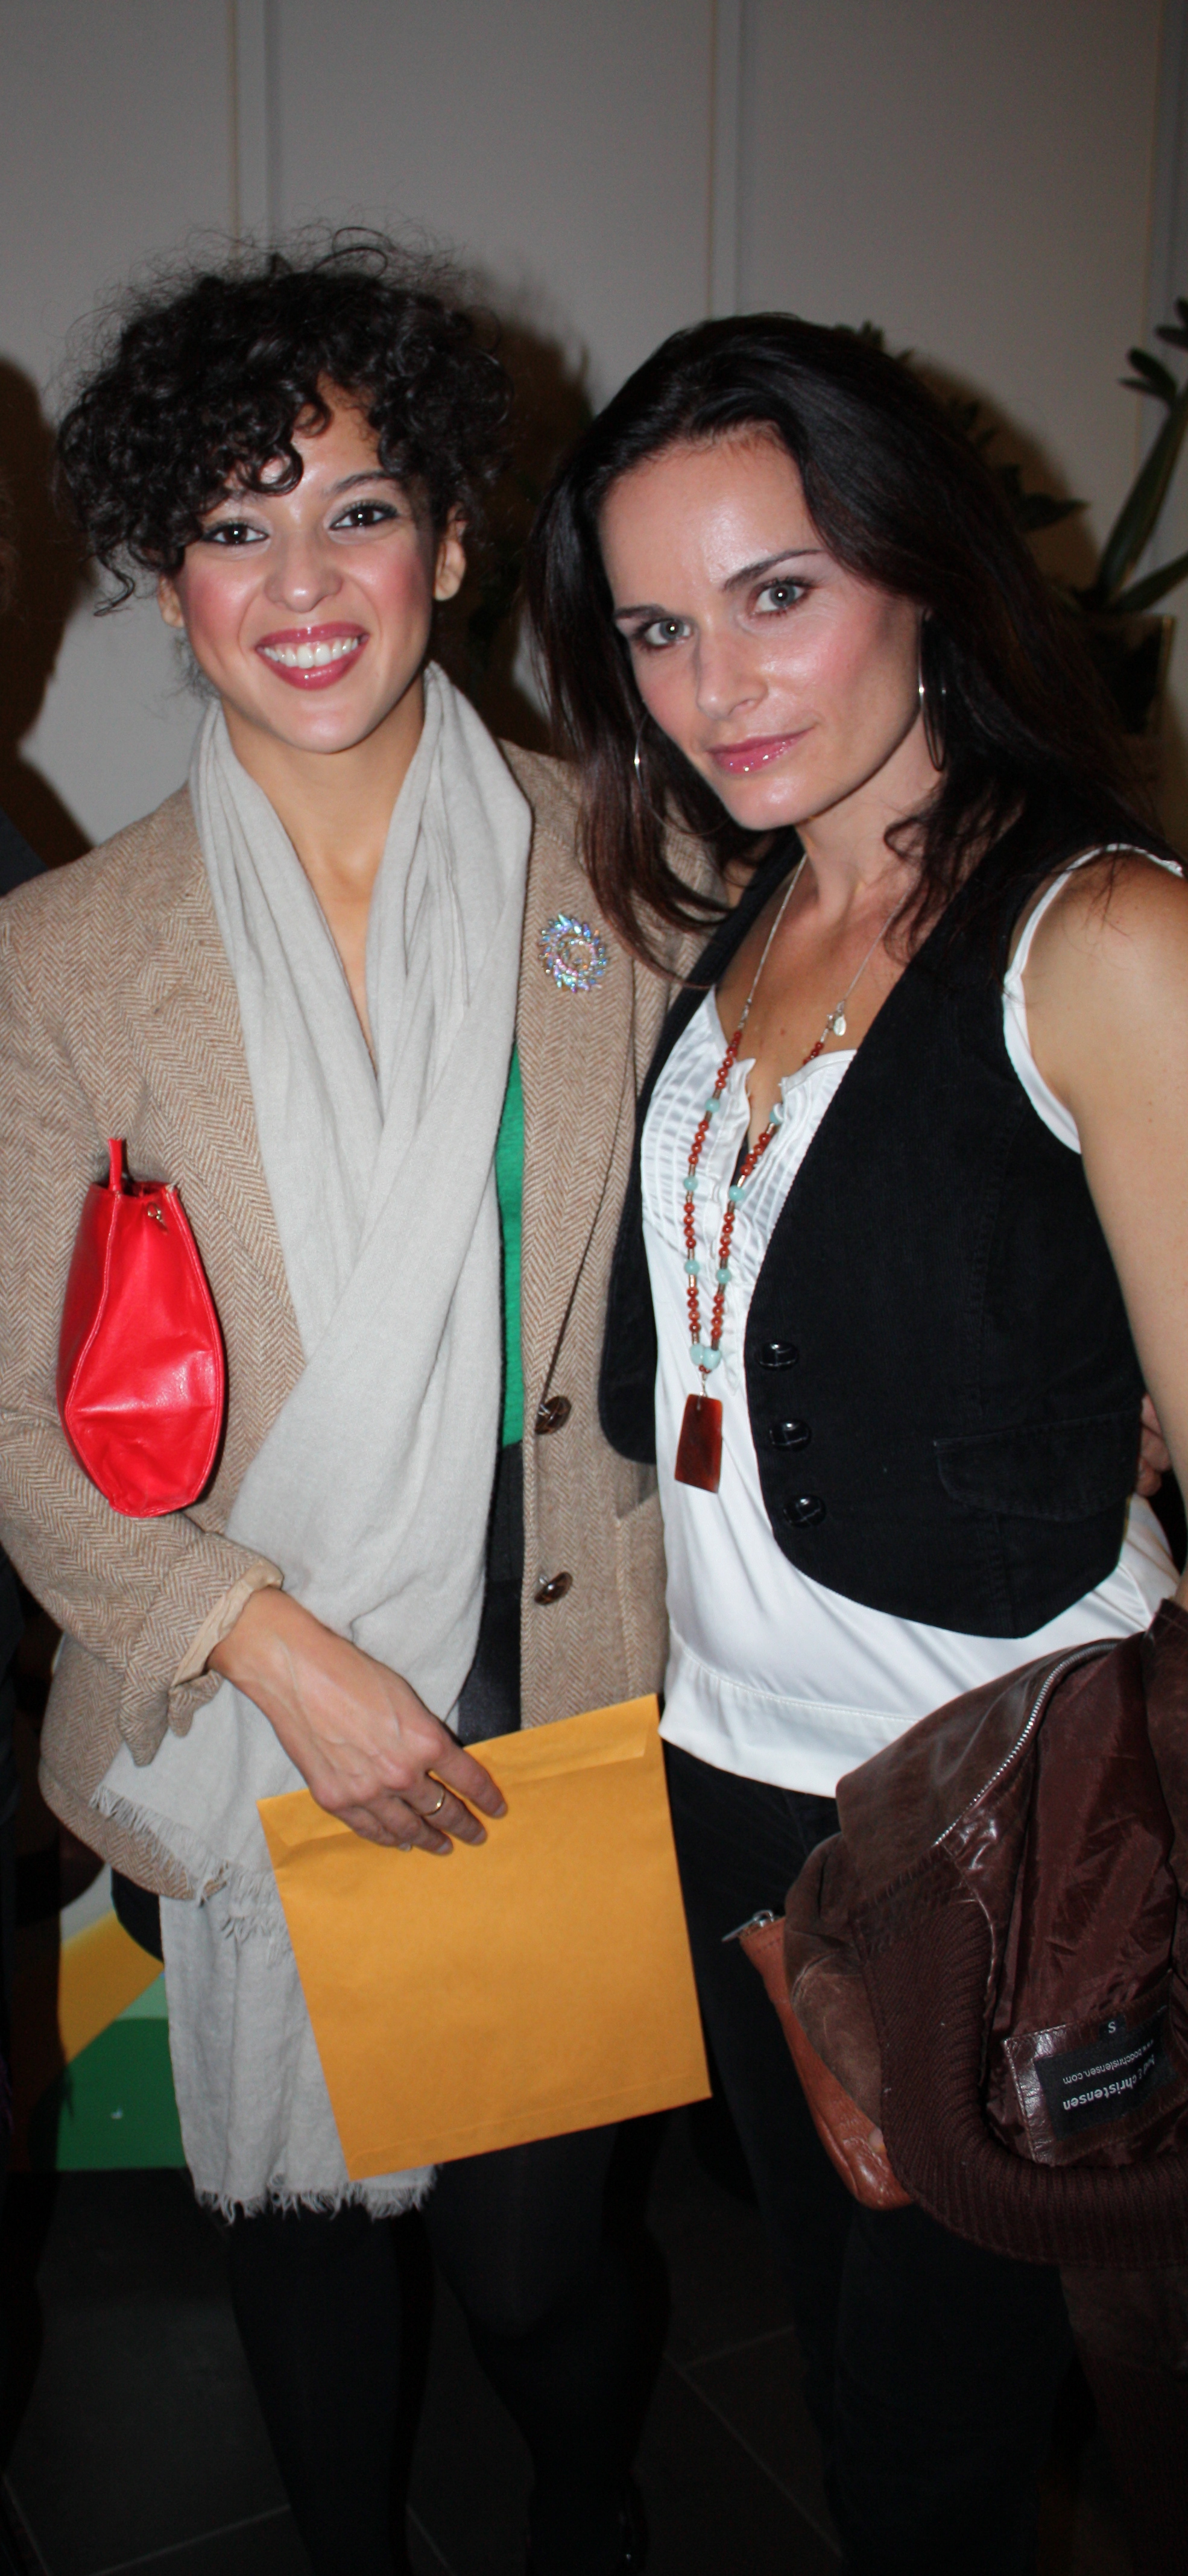 With co-writer Monica Mustelier (who walked away with Best Actress) at the Vancouver Short Film Festival, 2009.